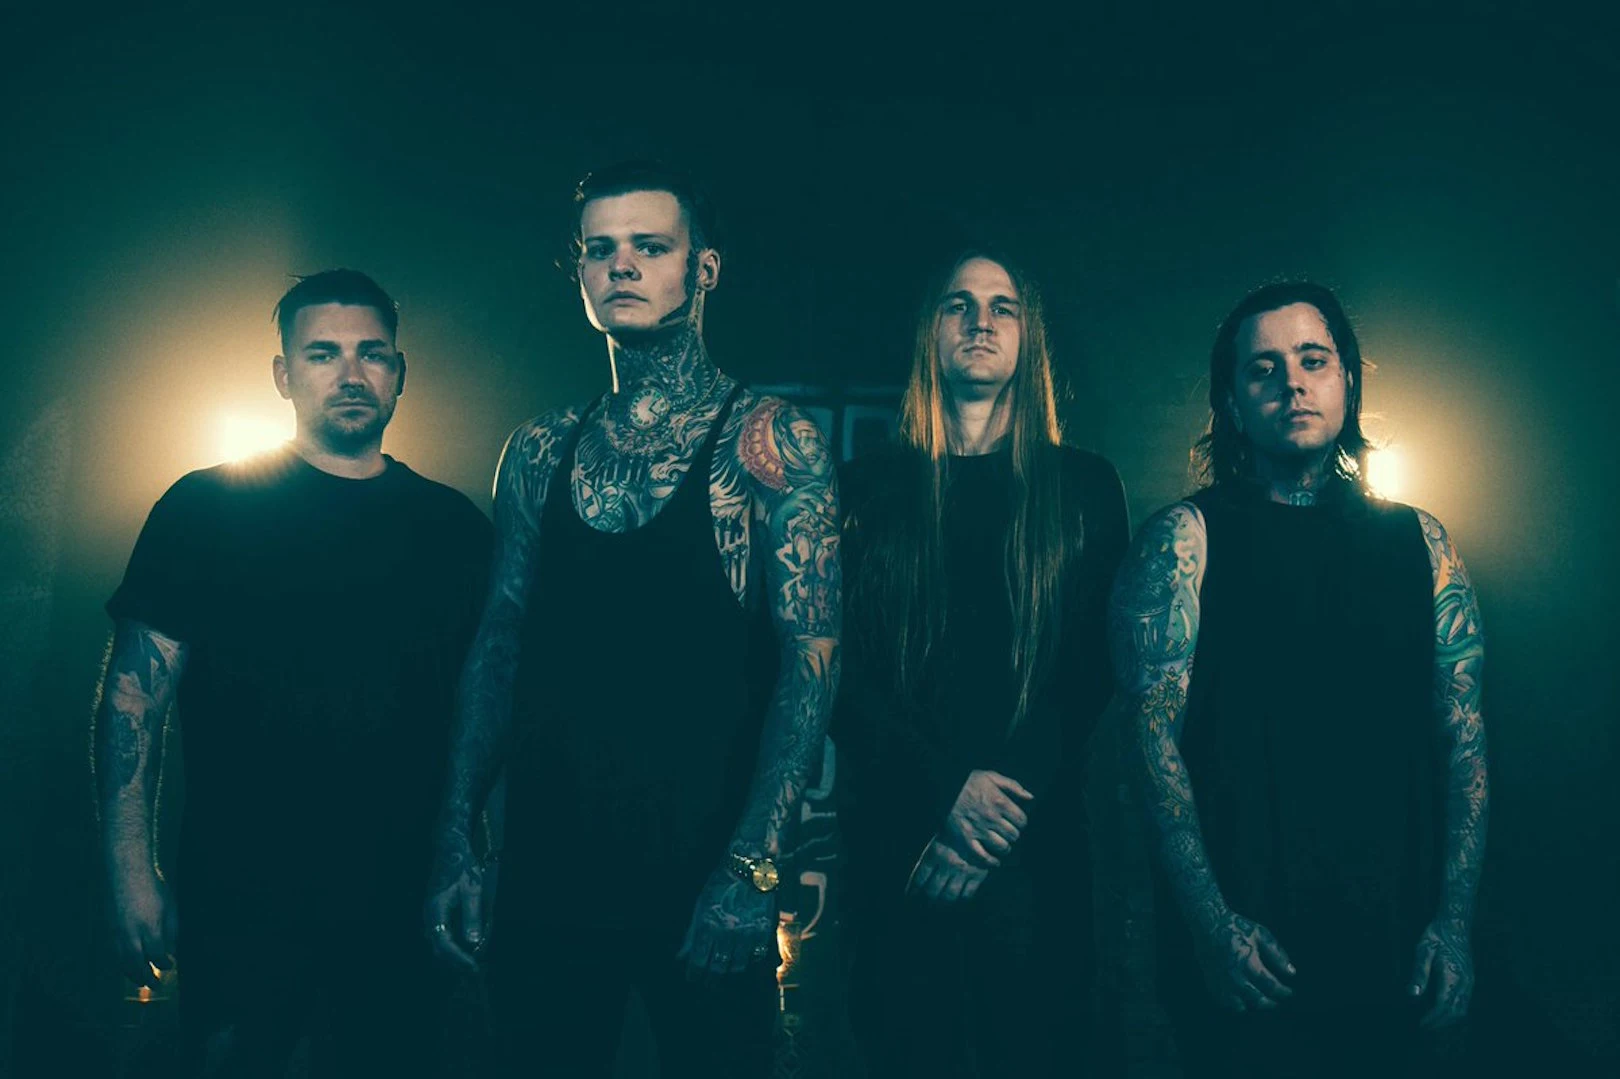 Lorna Shore Singer Accused of Sexual Misconduct by Multiple Women